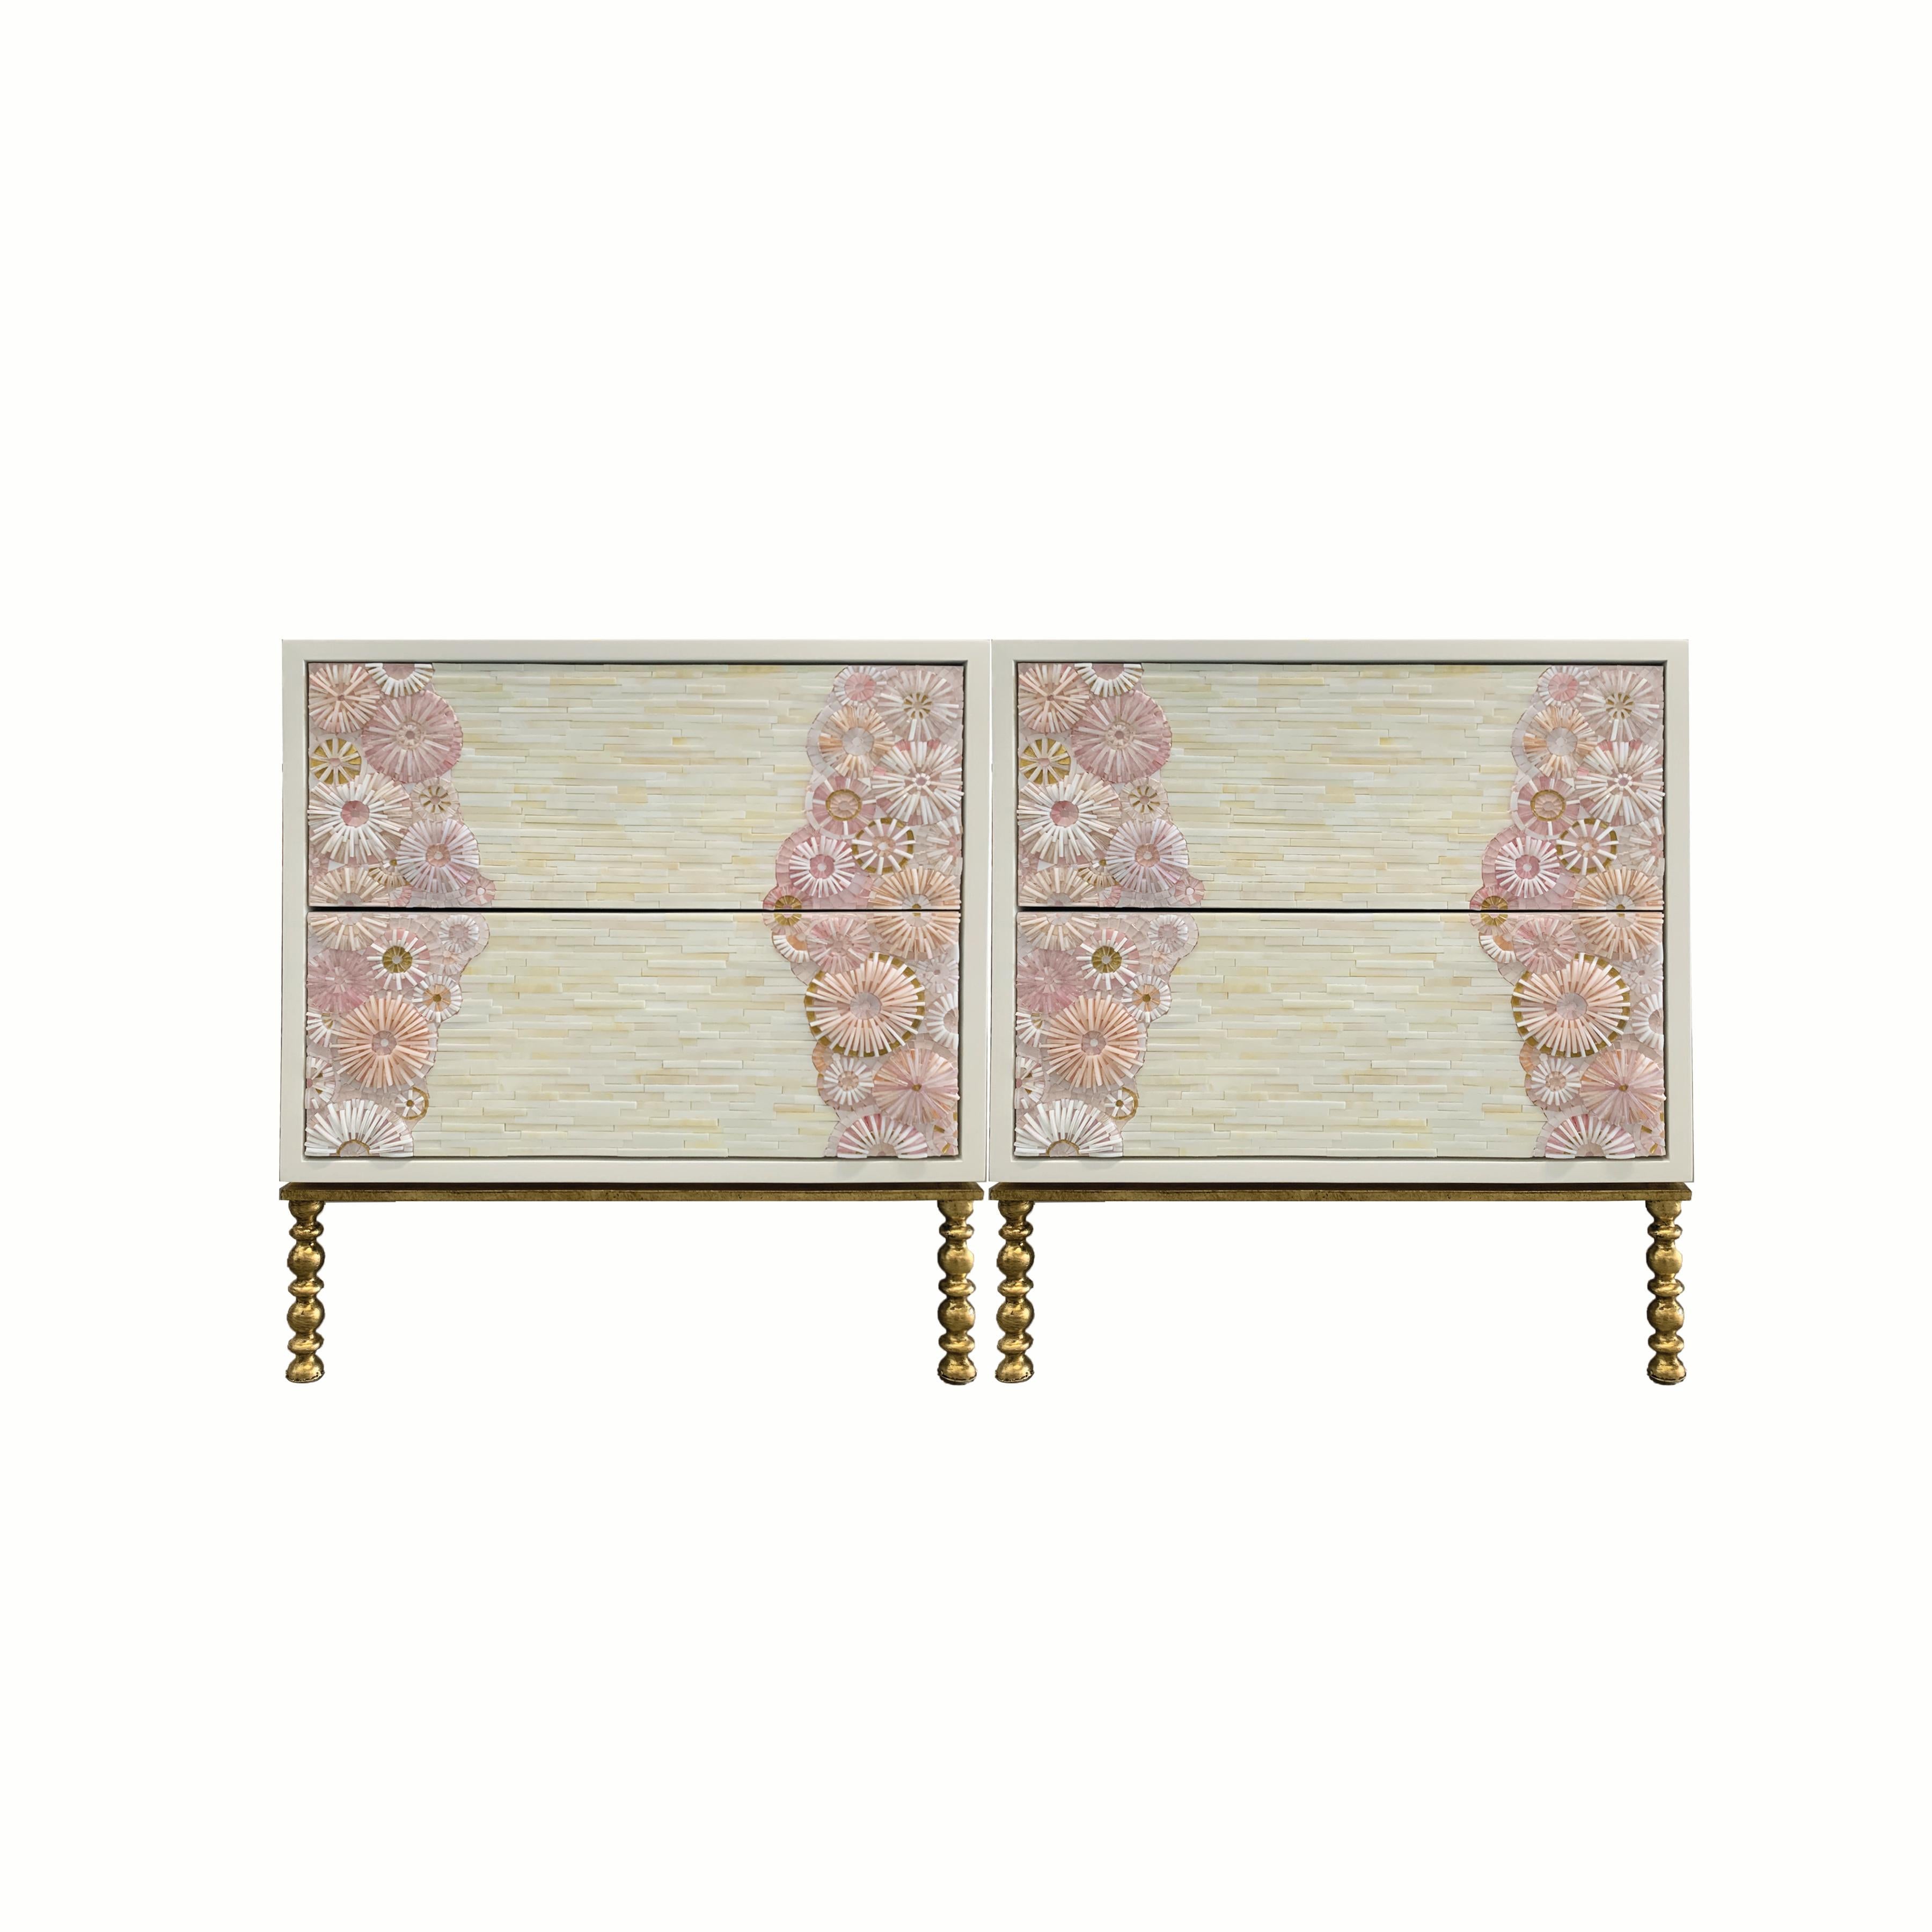 The blossom nightstand by Ercole Home has a 2-drawer front, with a white lacquer wood finish.
Handcut glass mosaic in variety shades of gold, pink, white and ivory decorate the surface in Blossom and stripe mosaic pattern.
The decorative metal